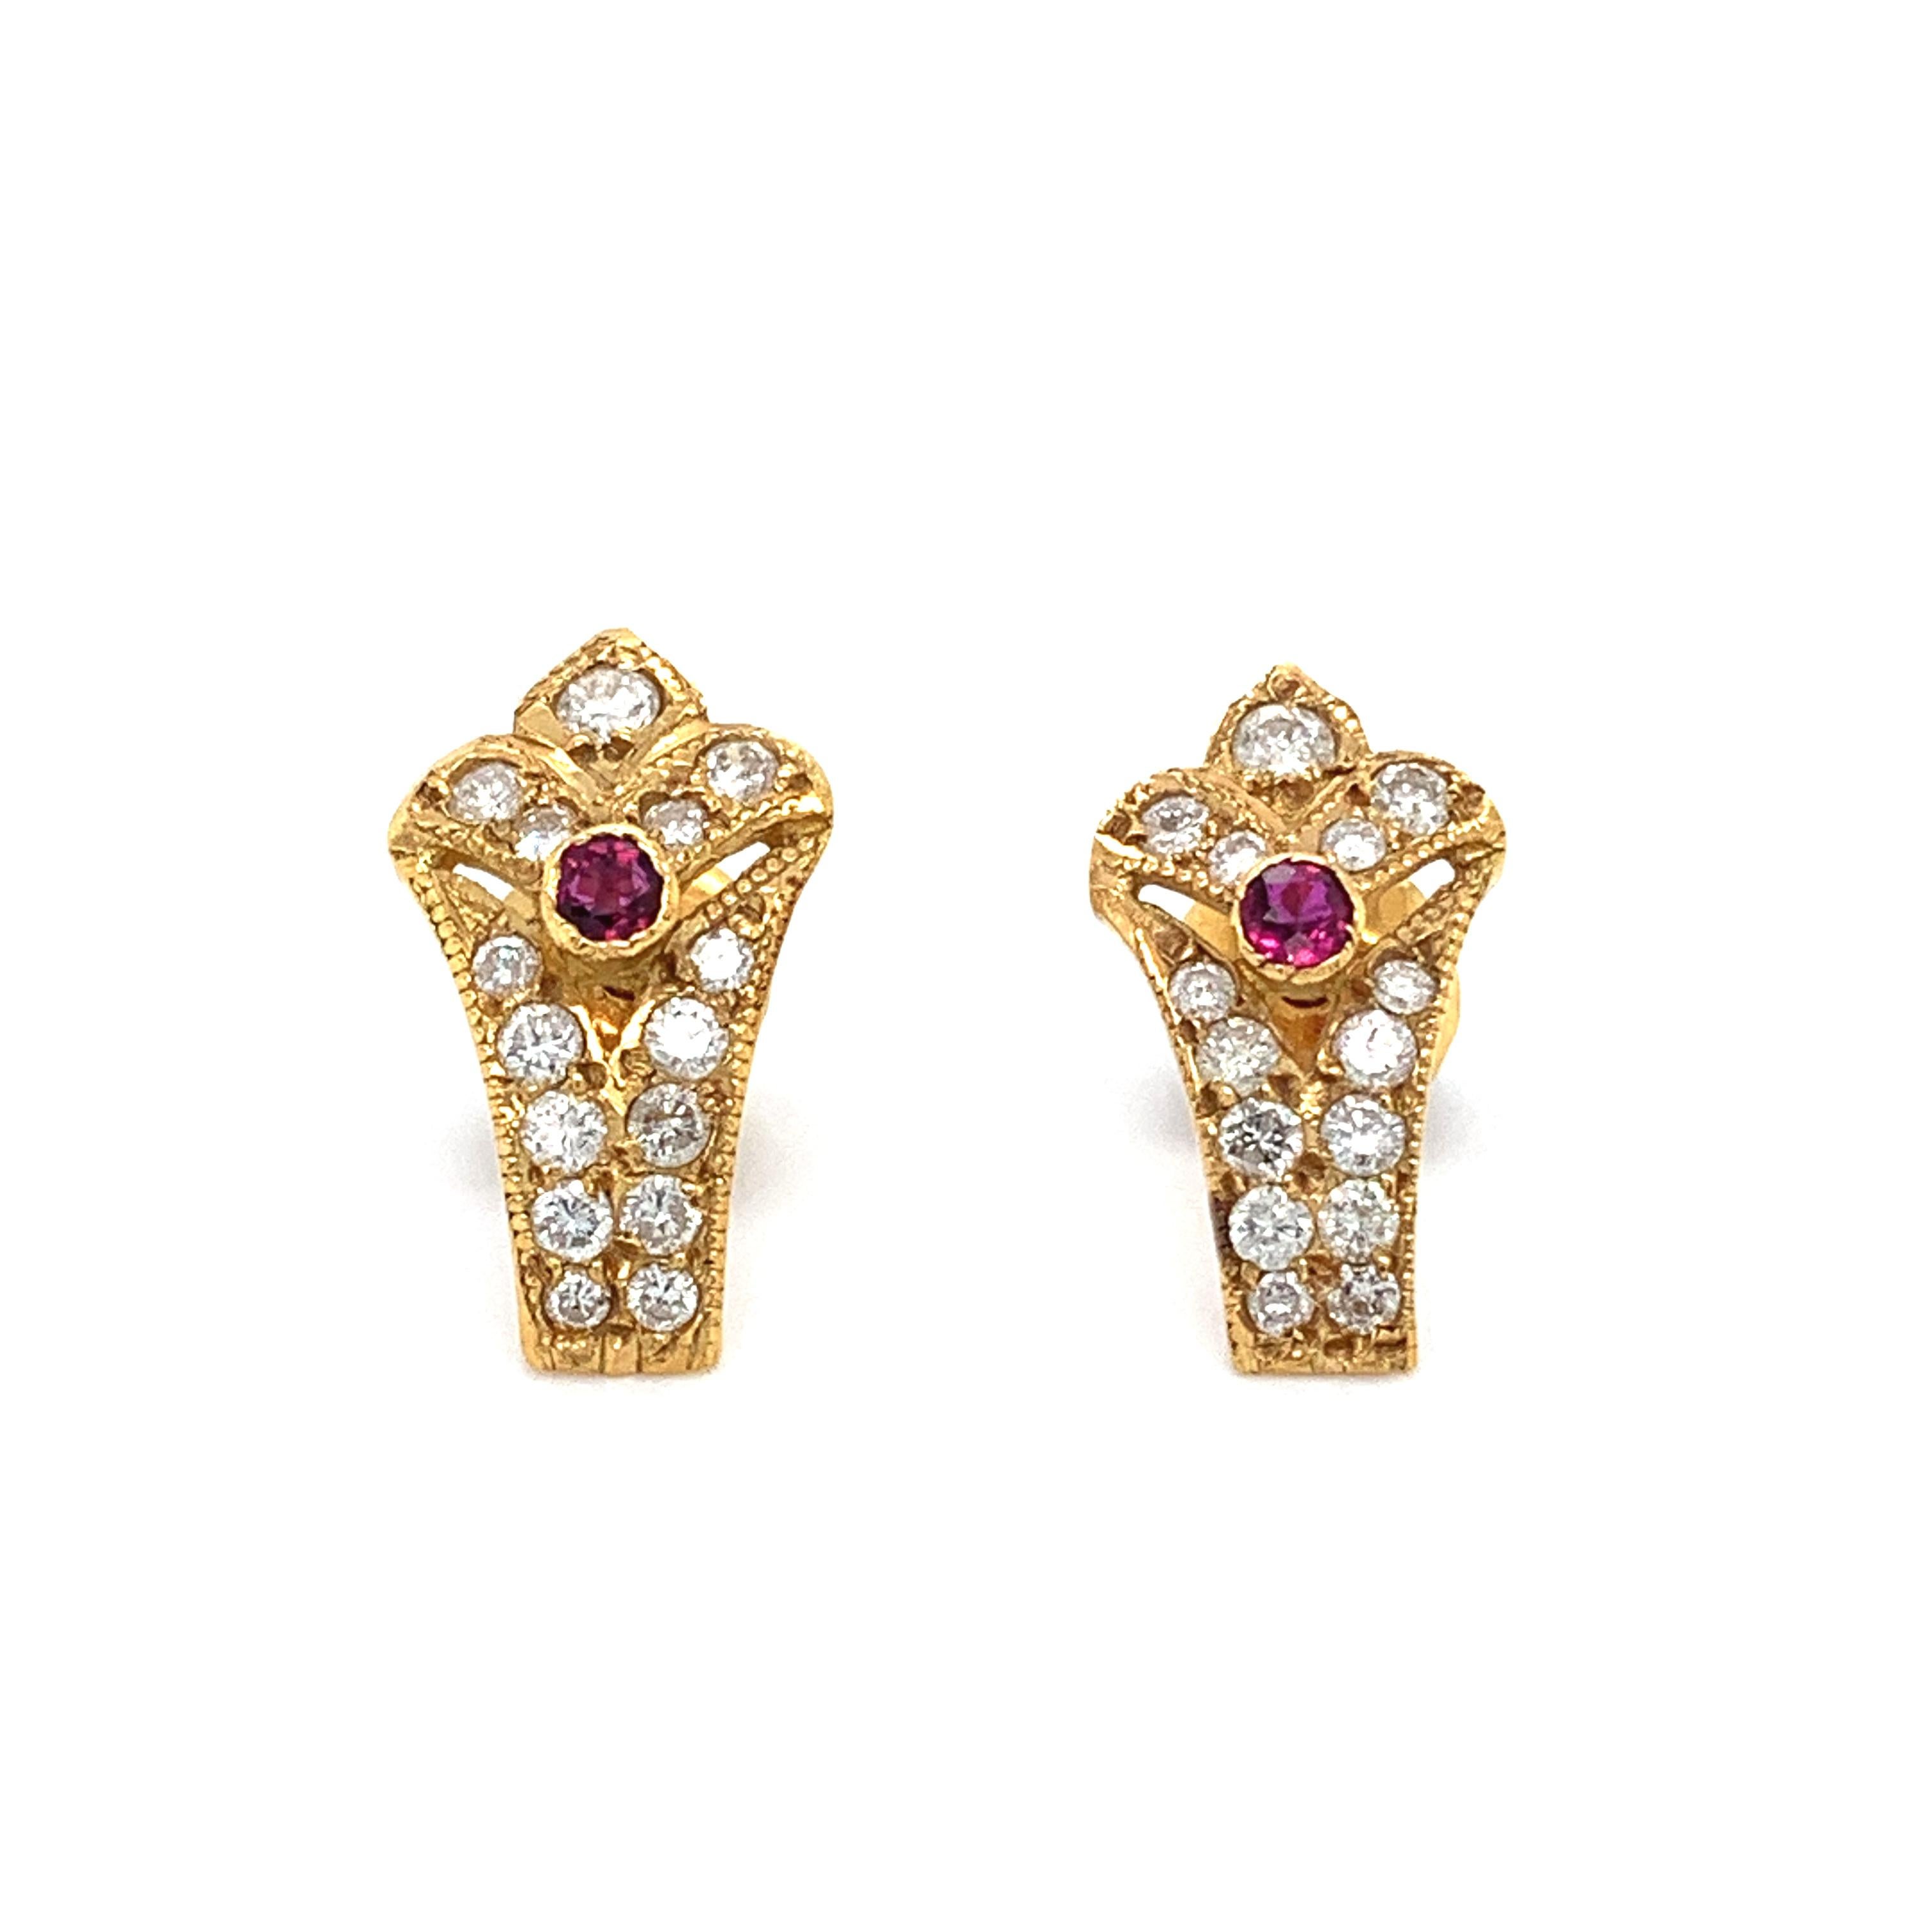 0.92ct Ruby diamonds art deco studs earrings 18k yellow gold
Composed of 0.92ct total gemstone weight and round brilliant diamond cut studs screw back earrings in 18k yellow gold.
Screw back settings 
Ruby gemstone natural total weight